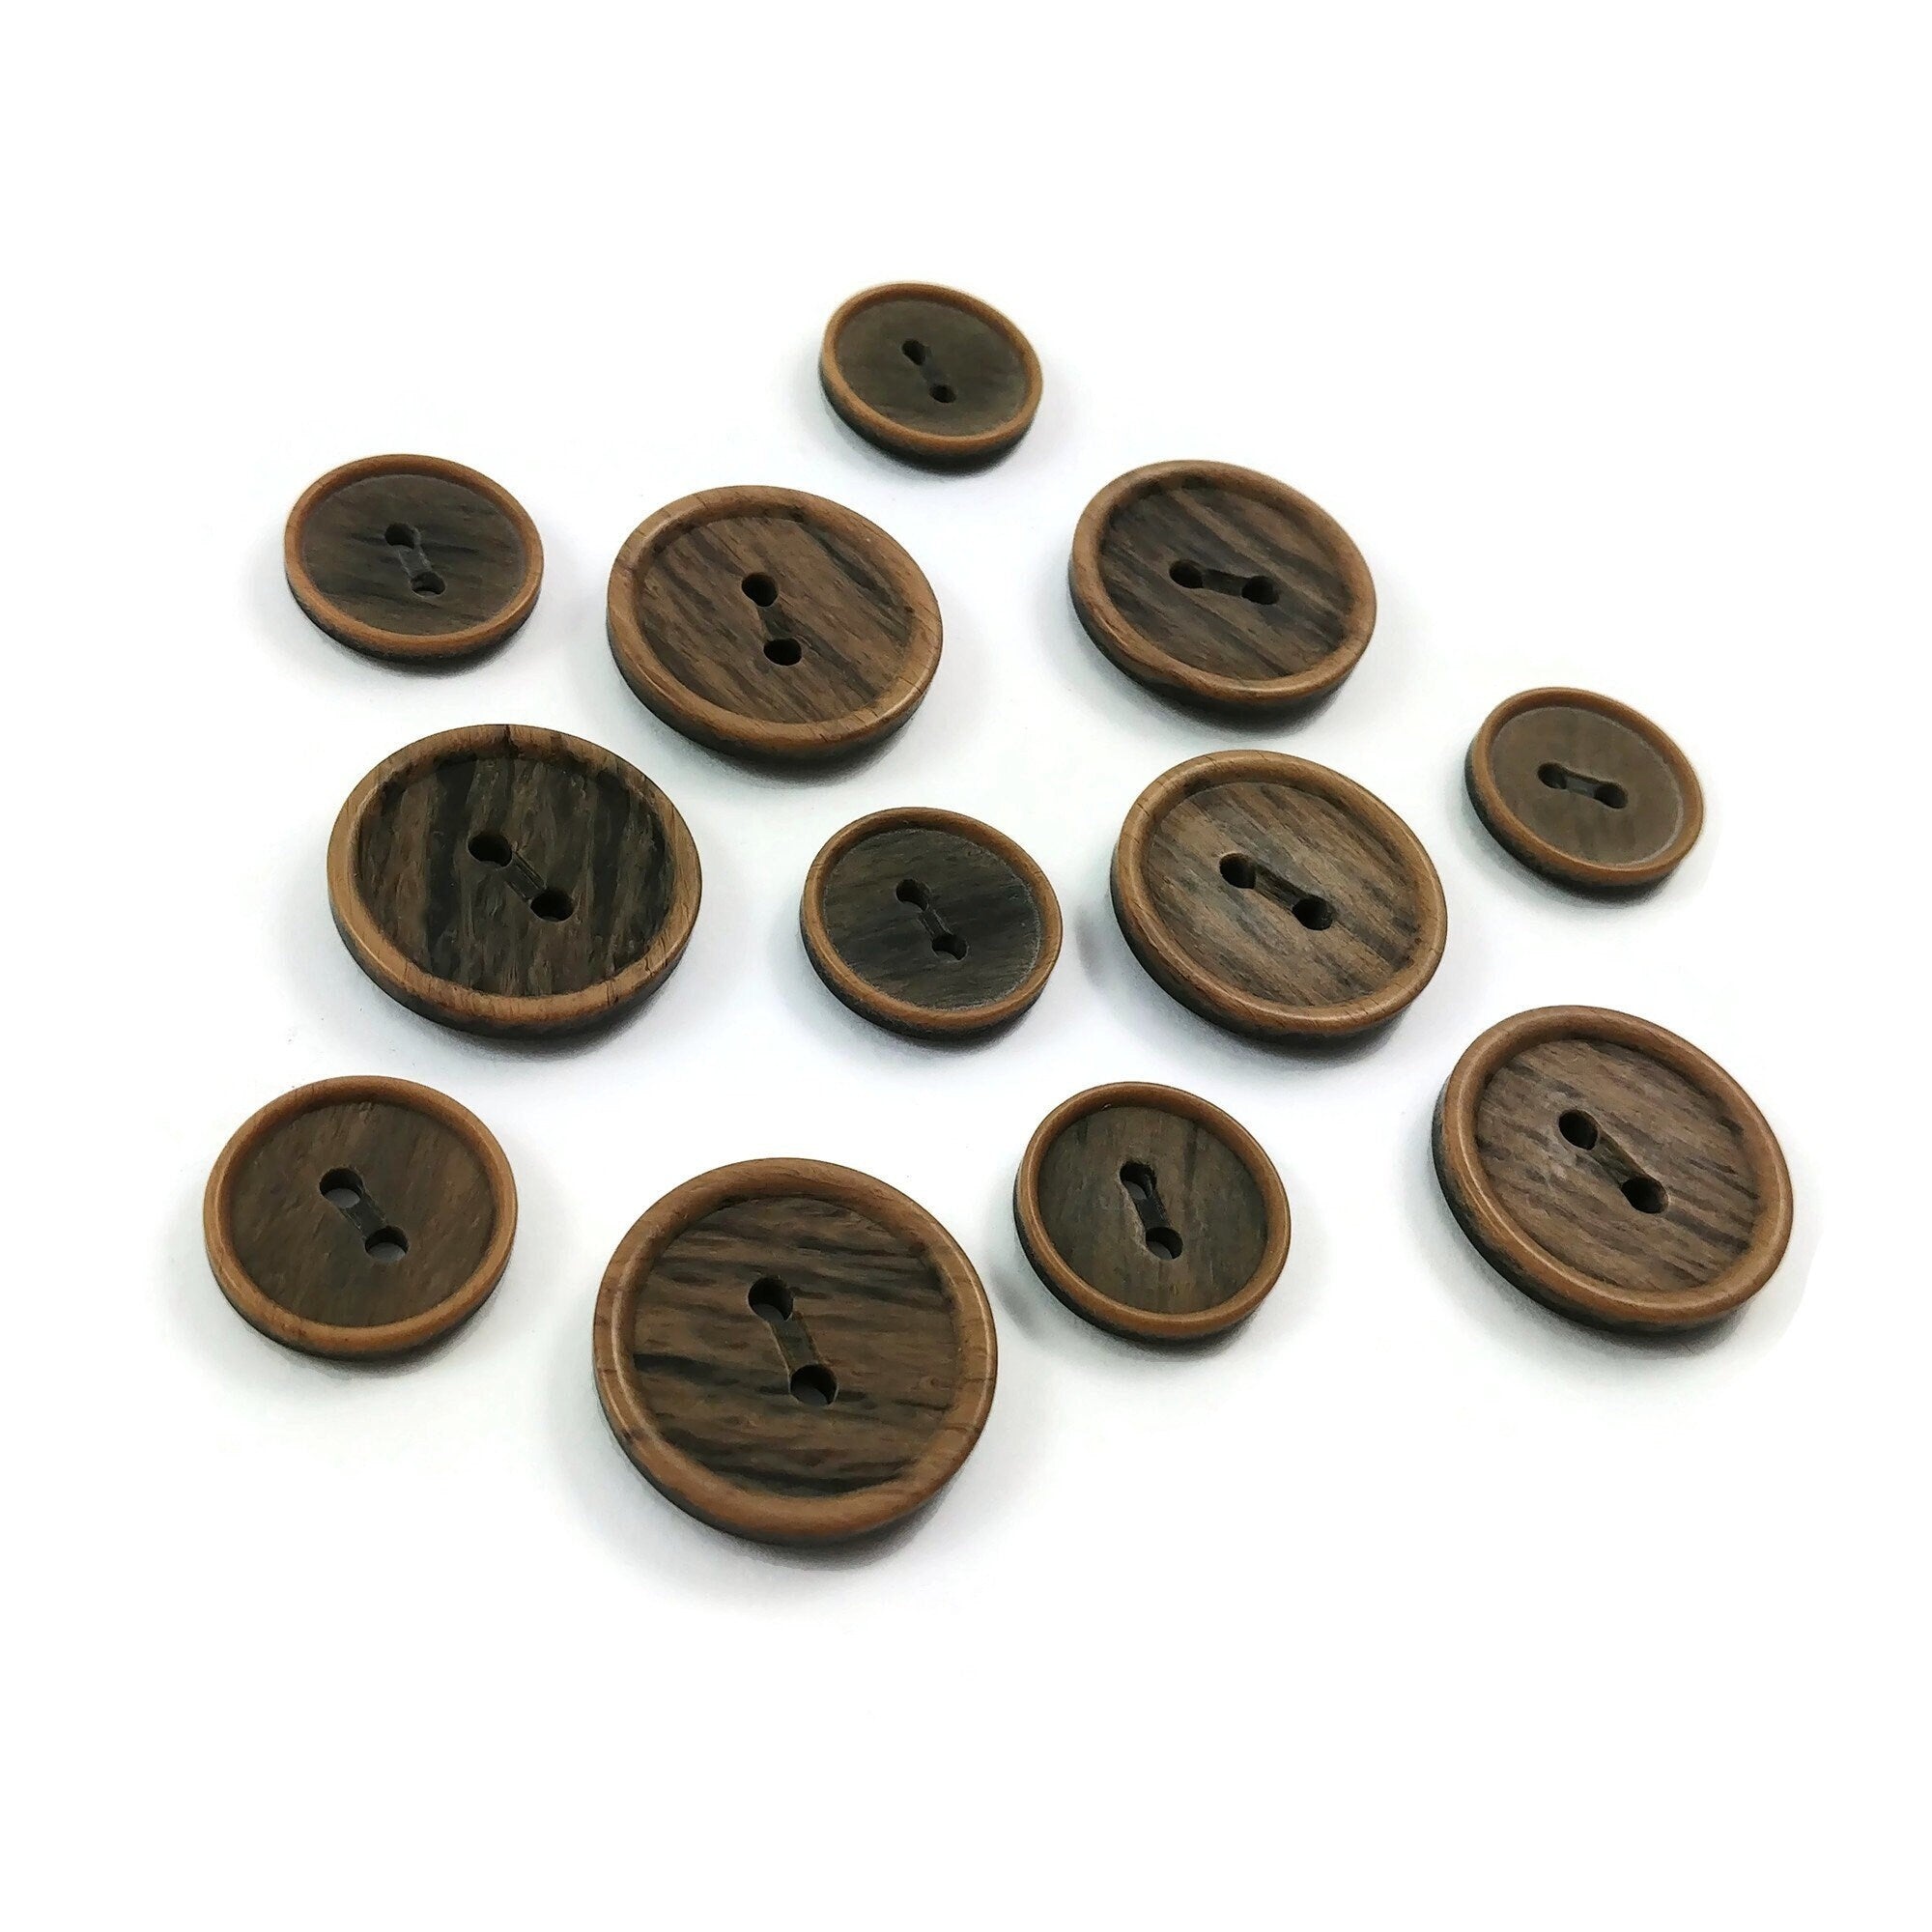 Brown Buttons, 10mm Buttons, Wooden Buttons, Rustic Buttons, Sewing  Supplies, Scrapbooking, Embellishments 